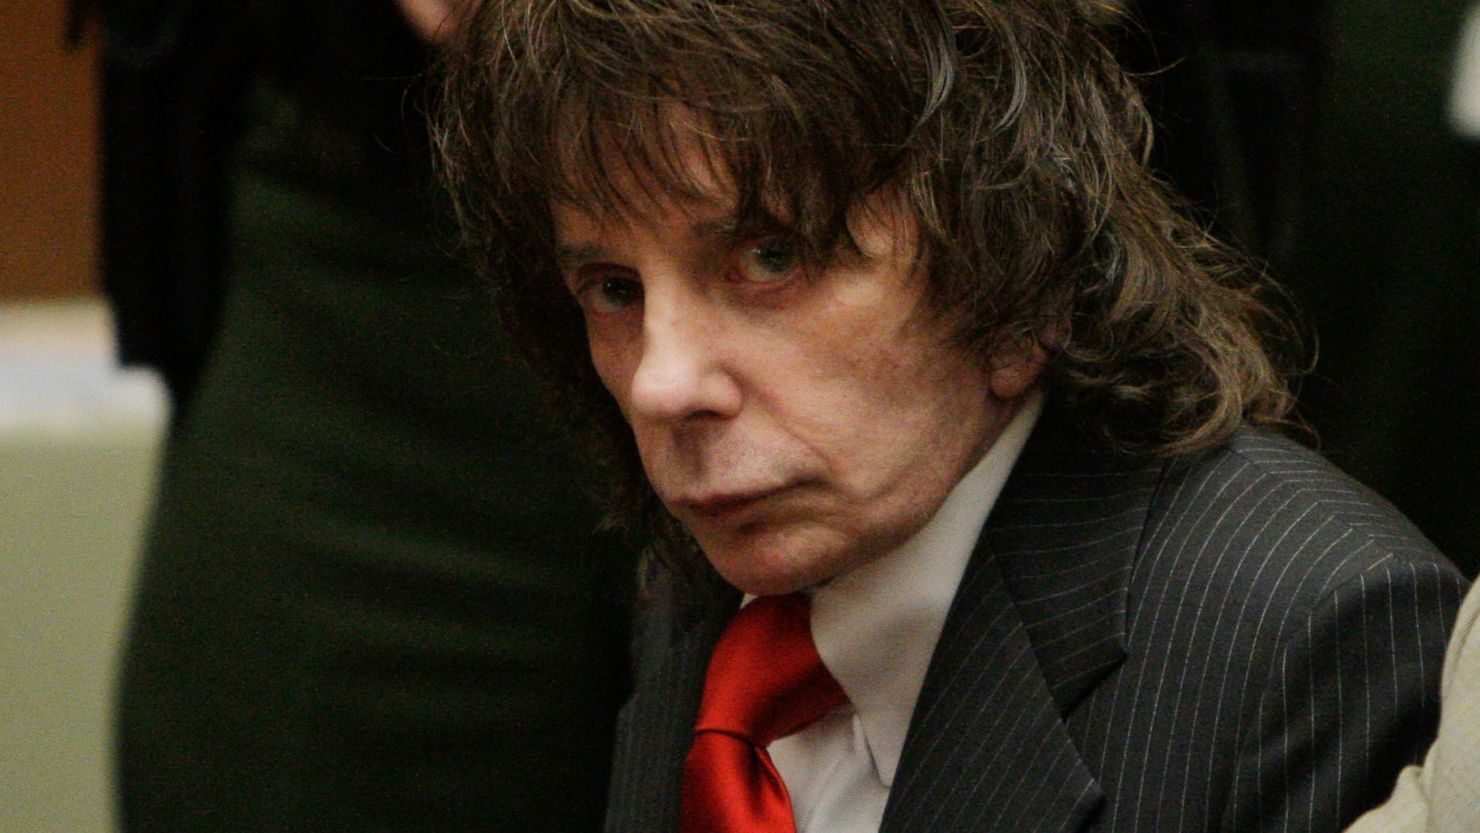 The California Supreme Court refused to hear Phil Spector's appeal.